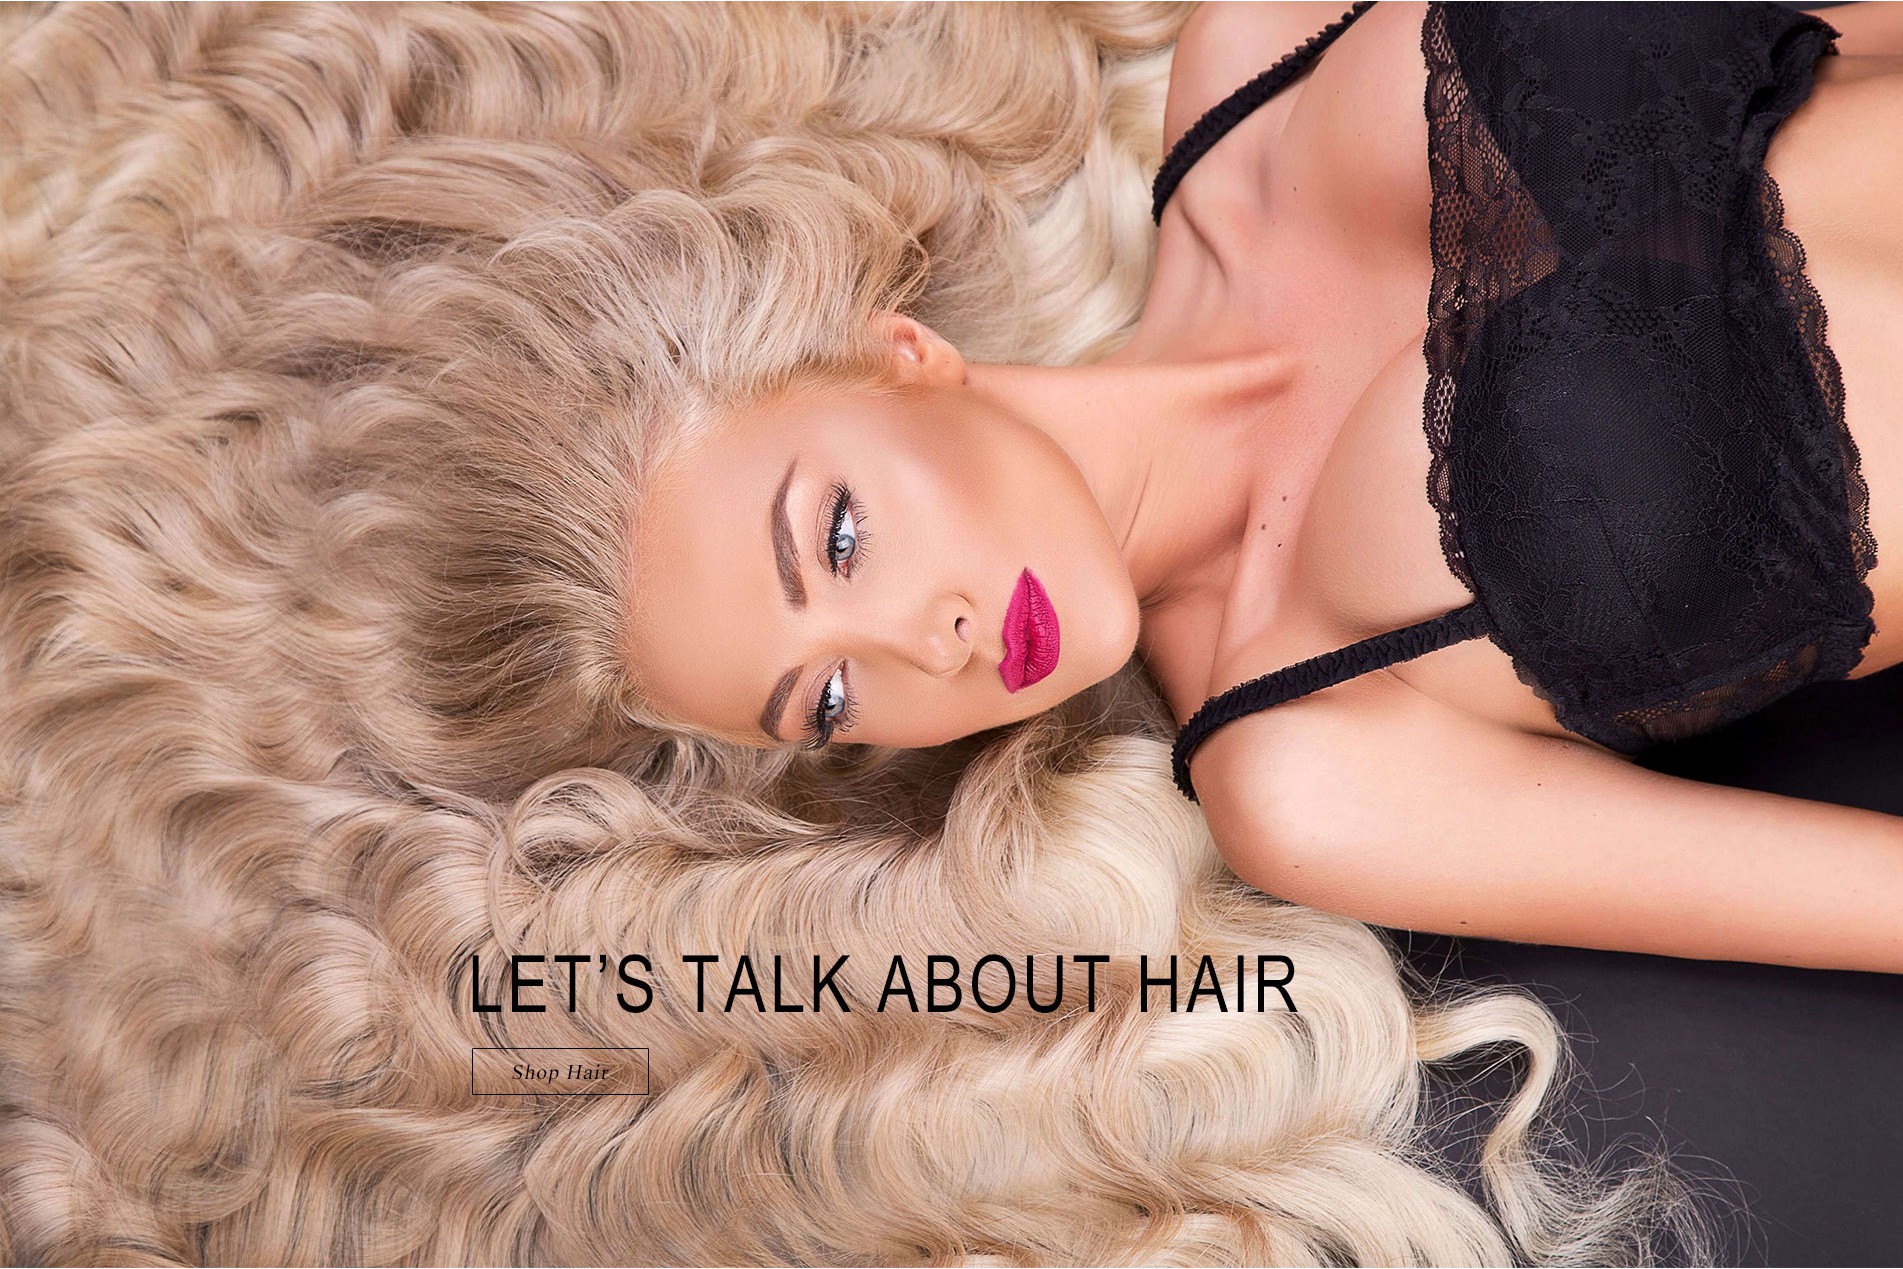 Blond woman with hair extensions laying down